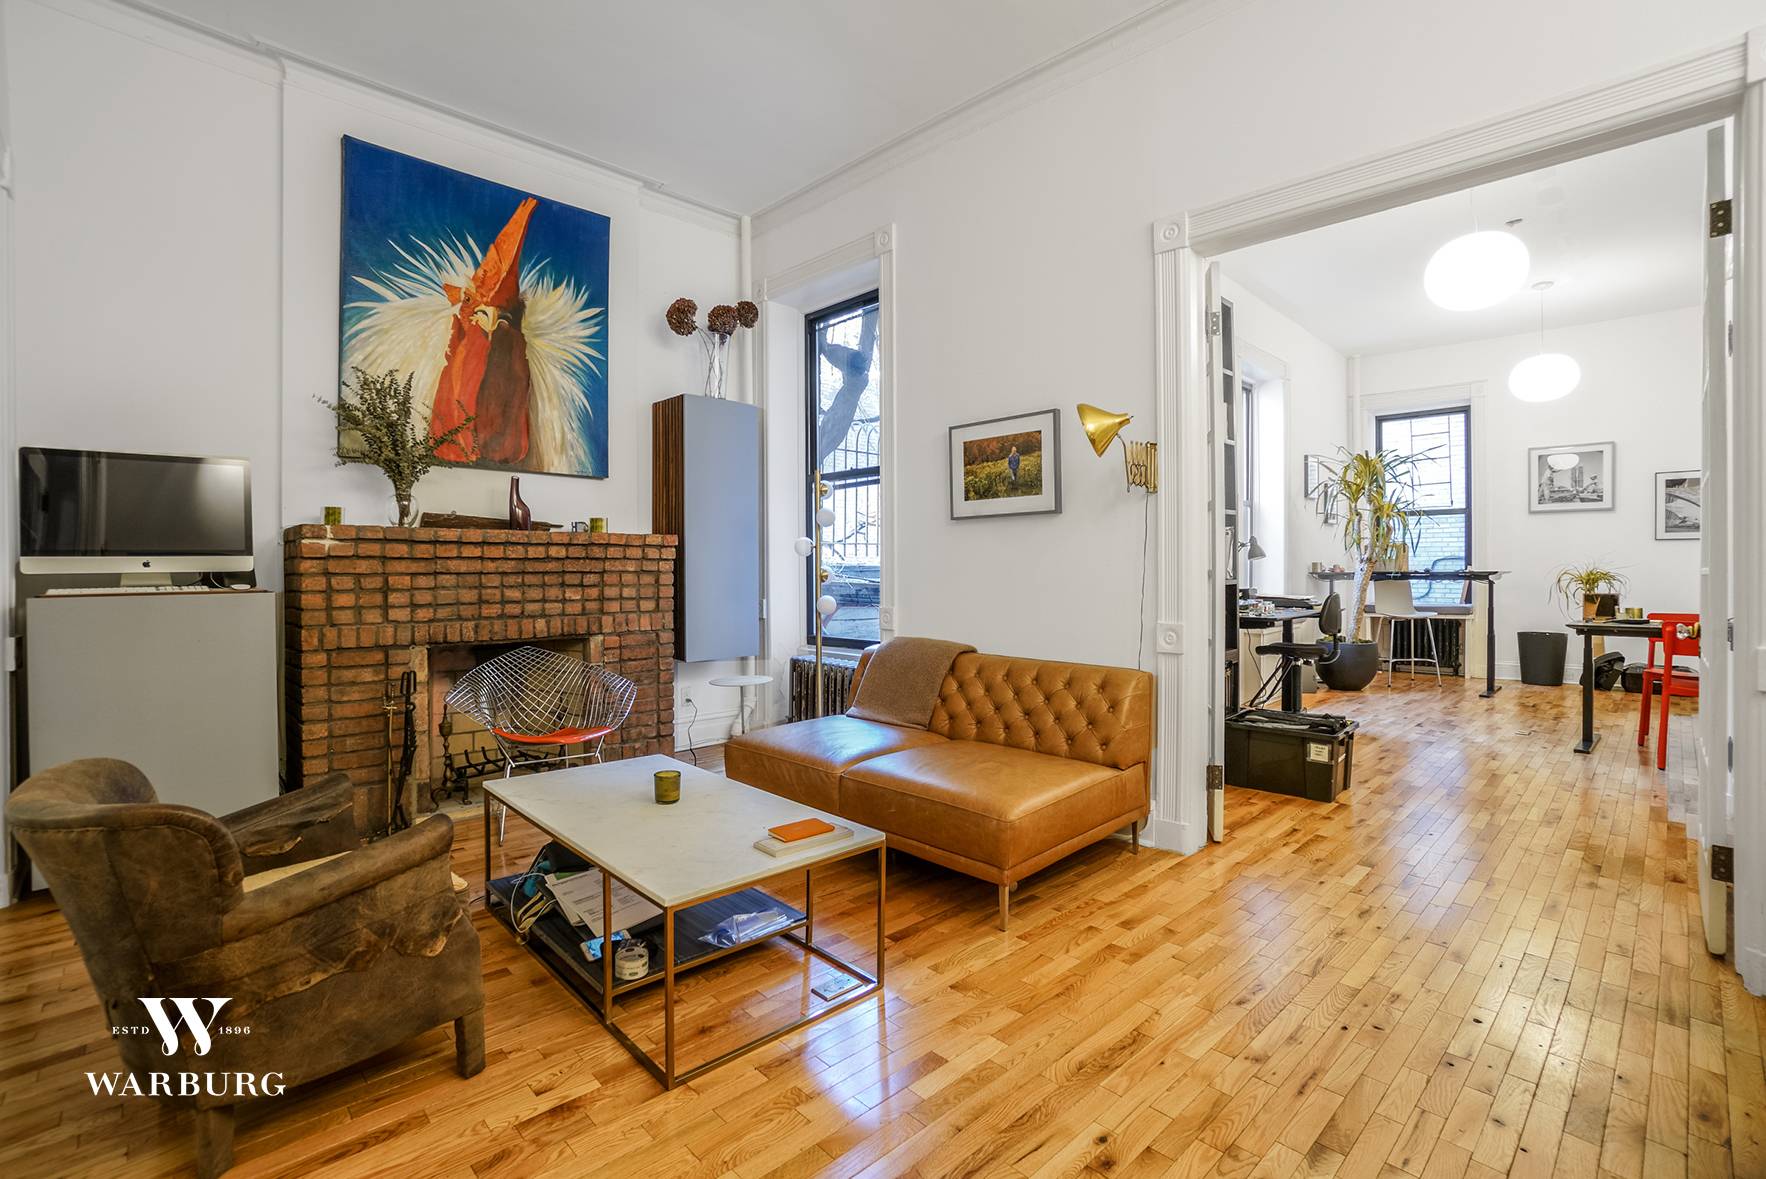 June 1, 2019 occupancy. Large, renovated one bedroom apartment with 12ft ceilings that can be used as a live work space.